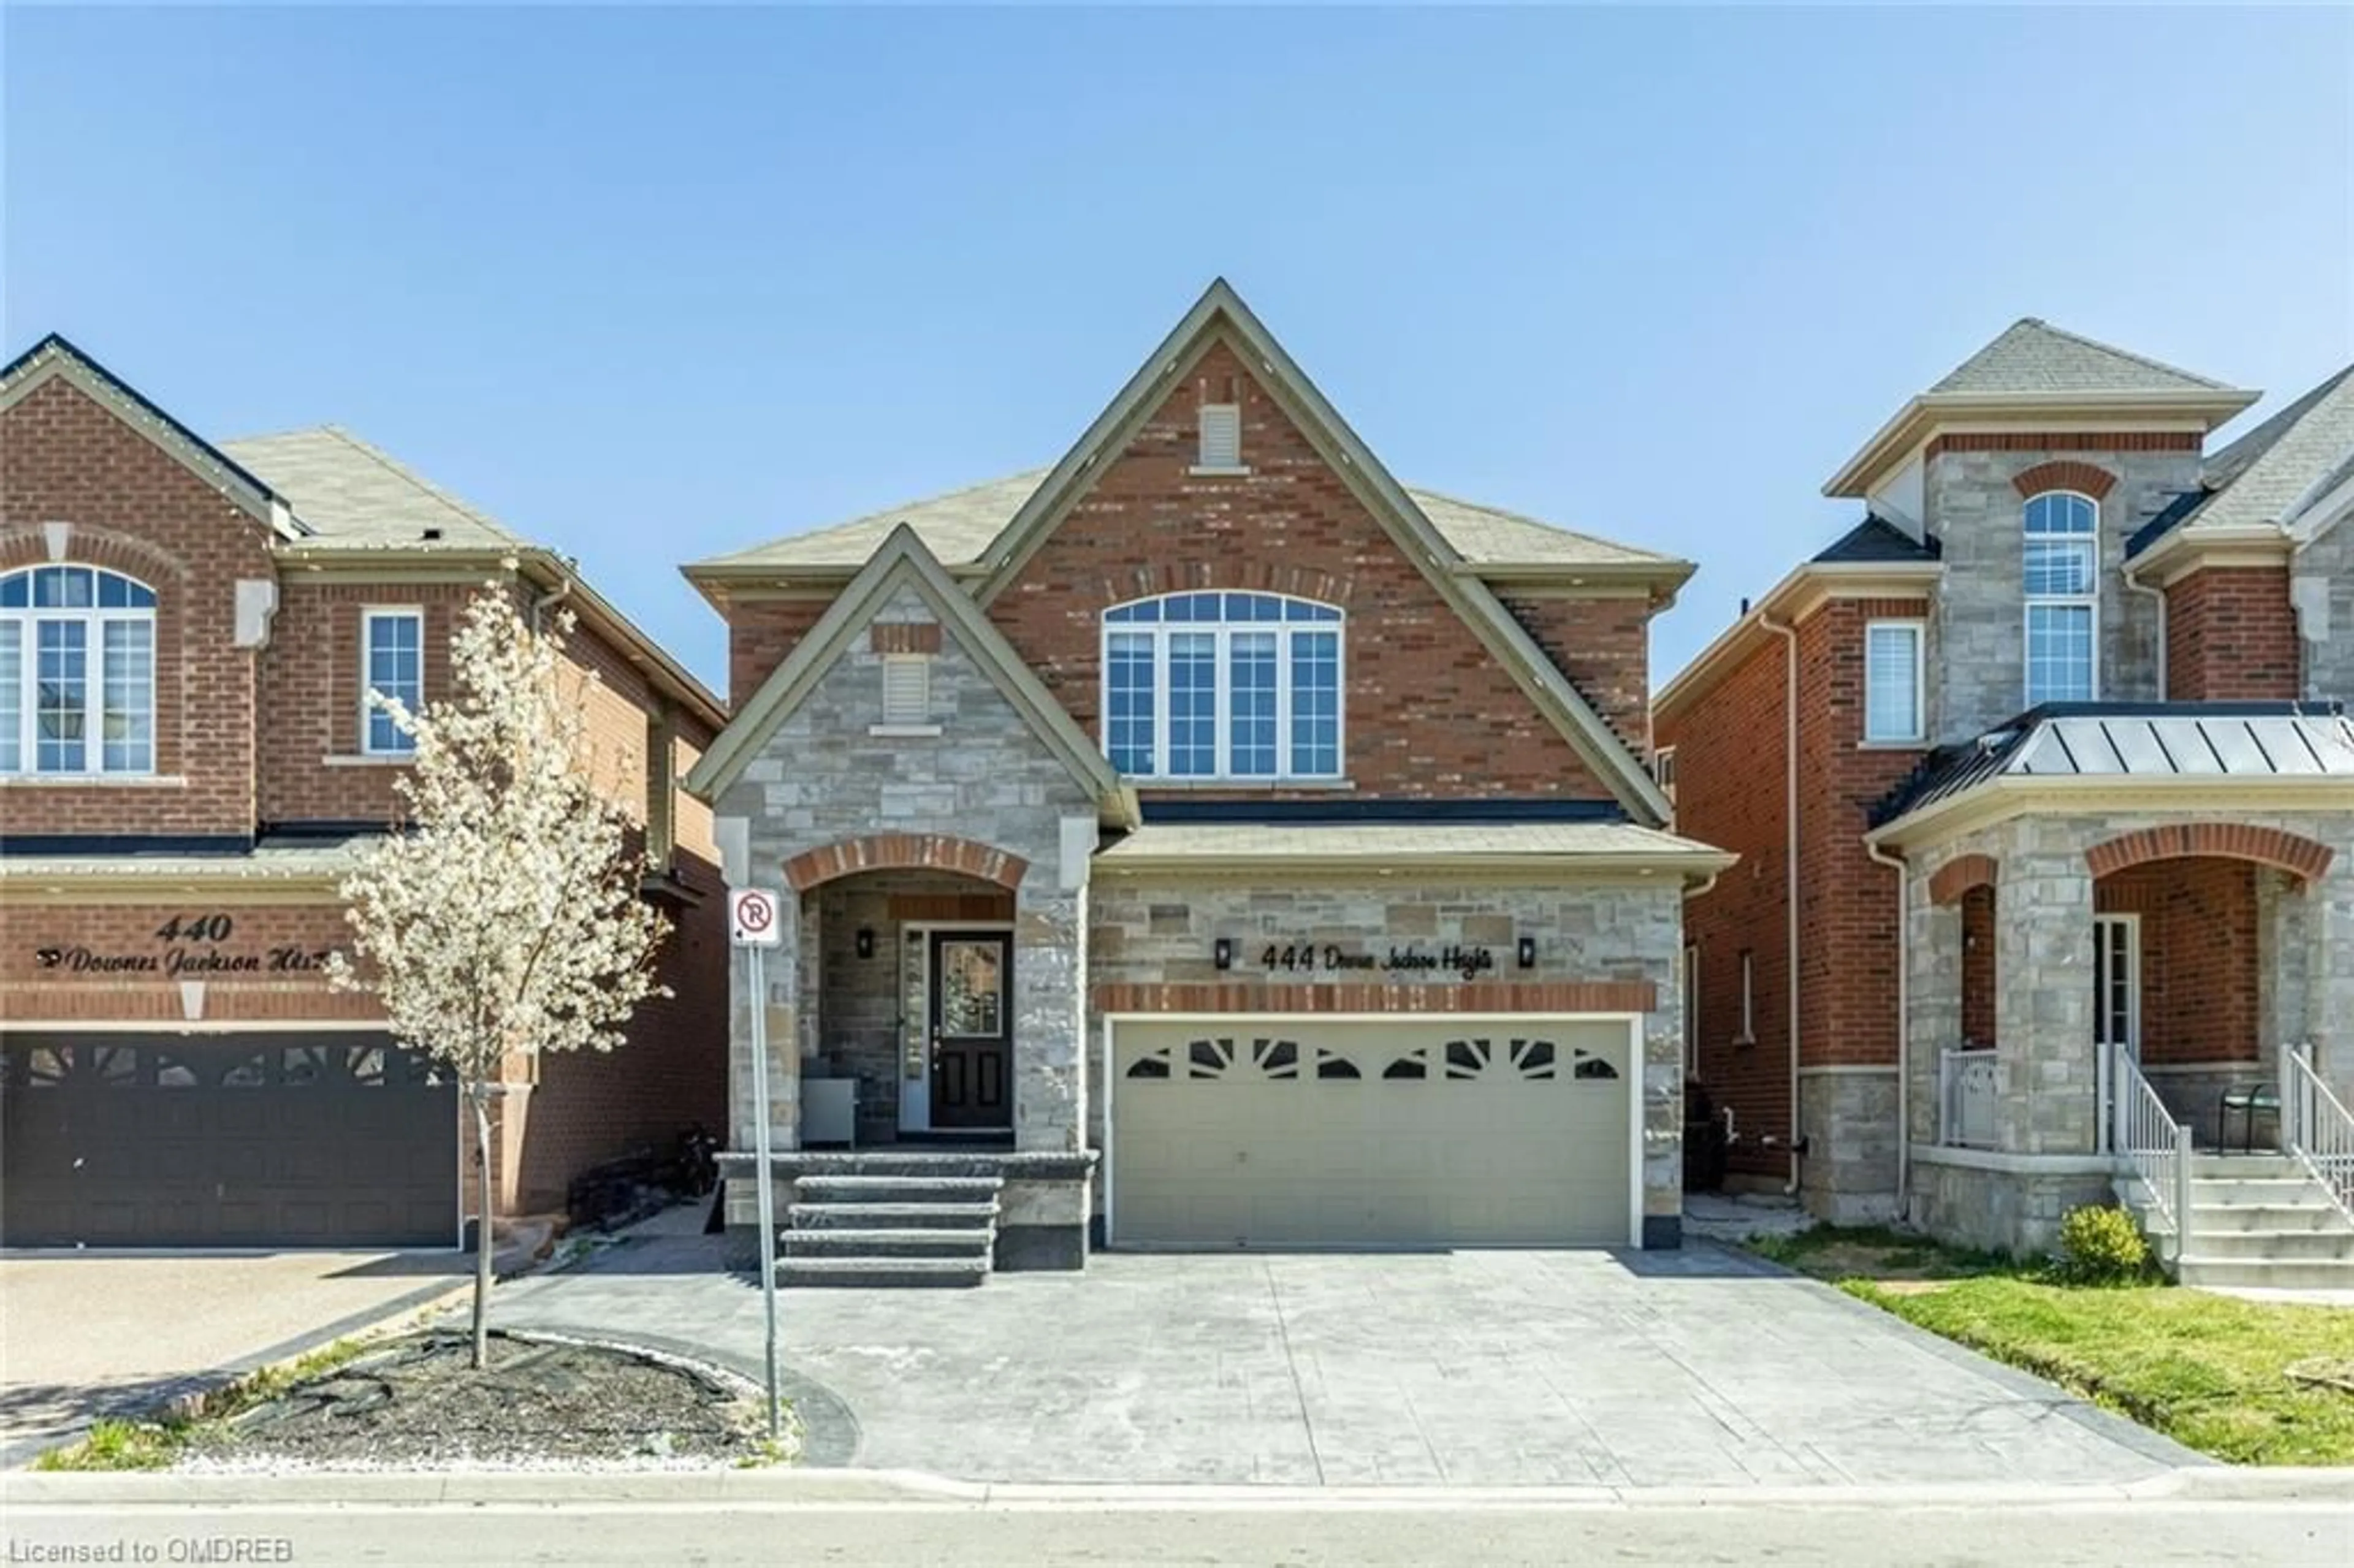 Home with brick exterior material for 444 Downes Jackson Hts, Milton Ontario L9T 7V1